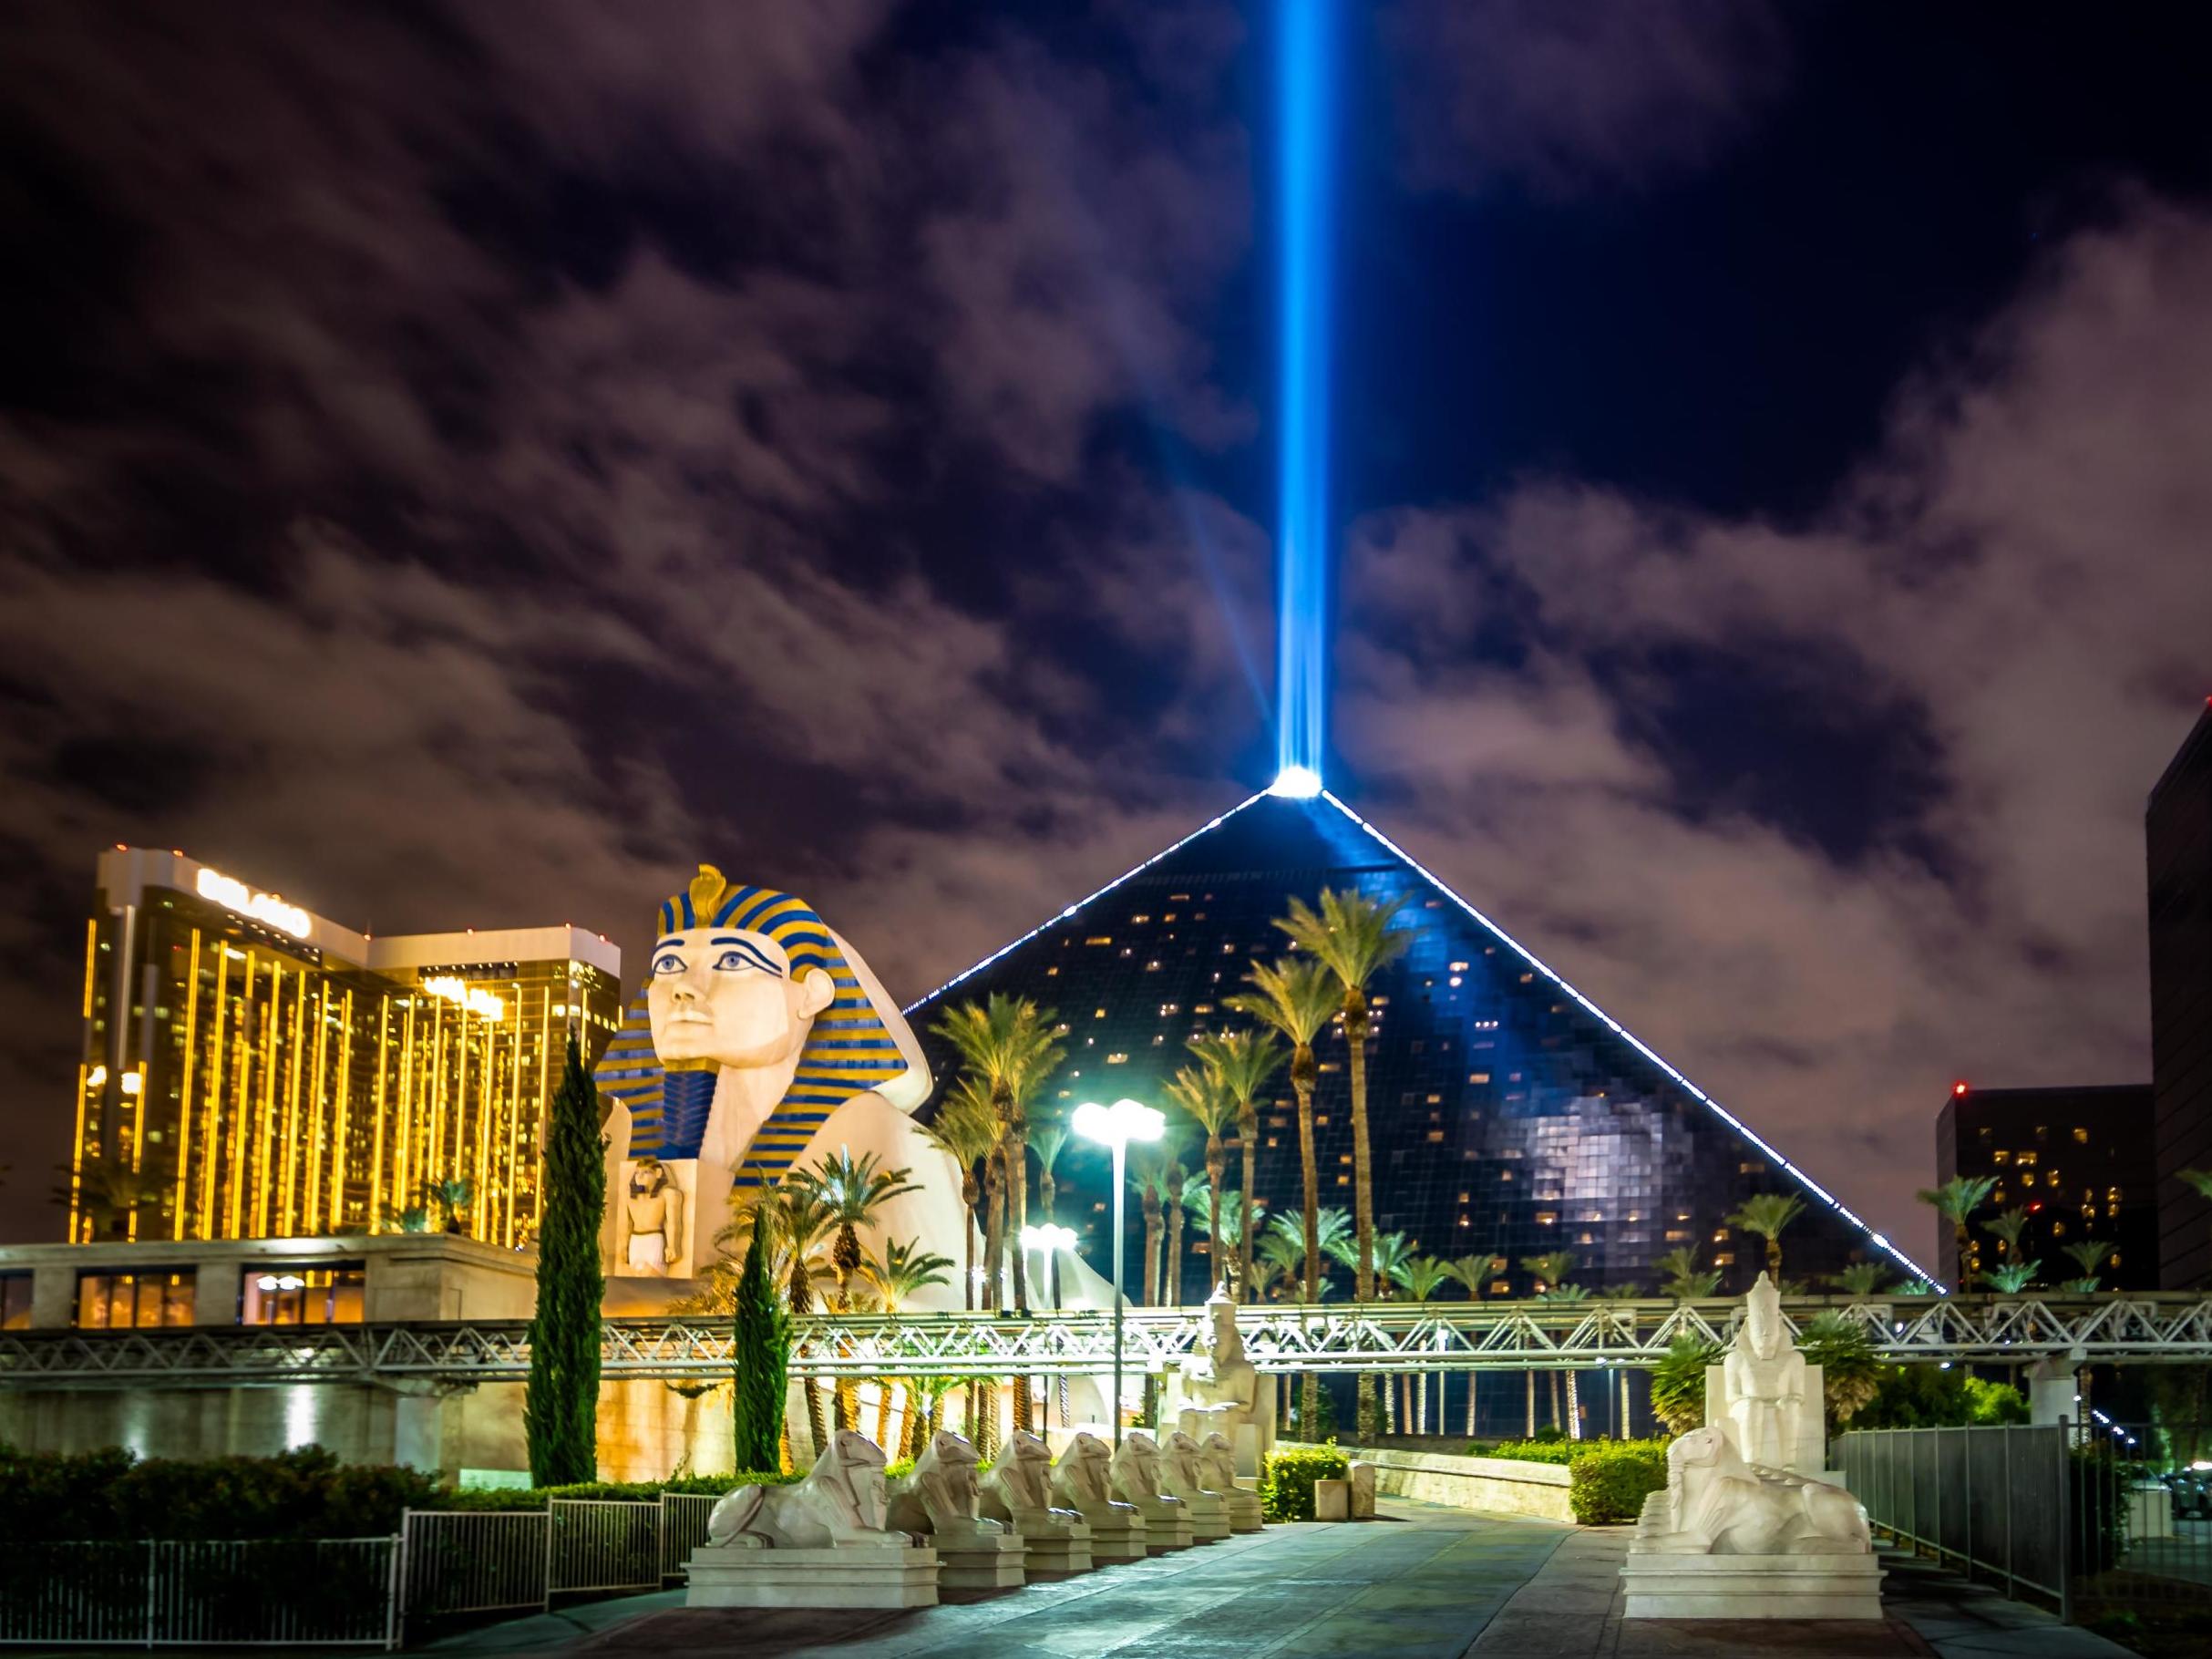 Swarm of grasshoppers has invaded Las Vegas, drawn to huge beam of light emanating from Ancient Egypt-themed Luxor Hotel